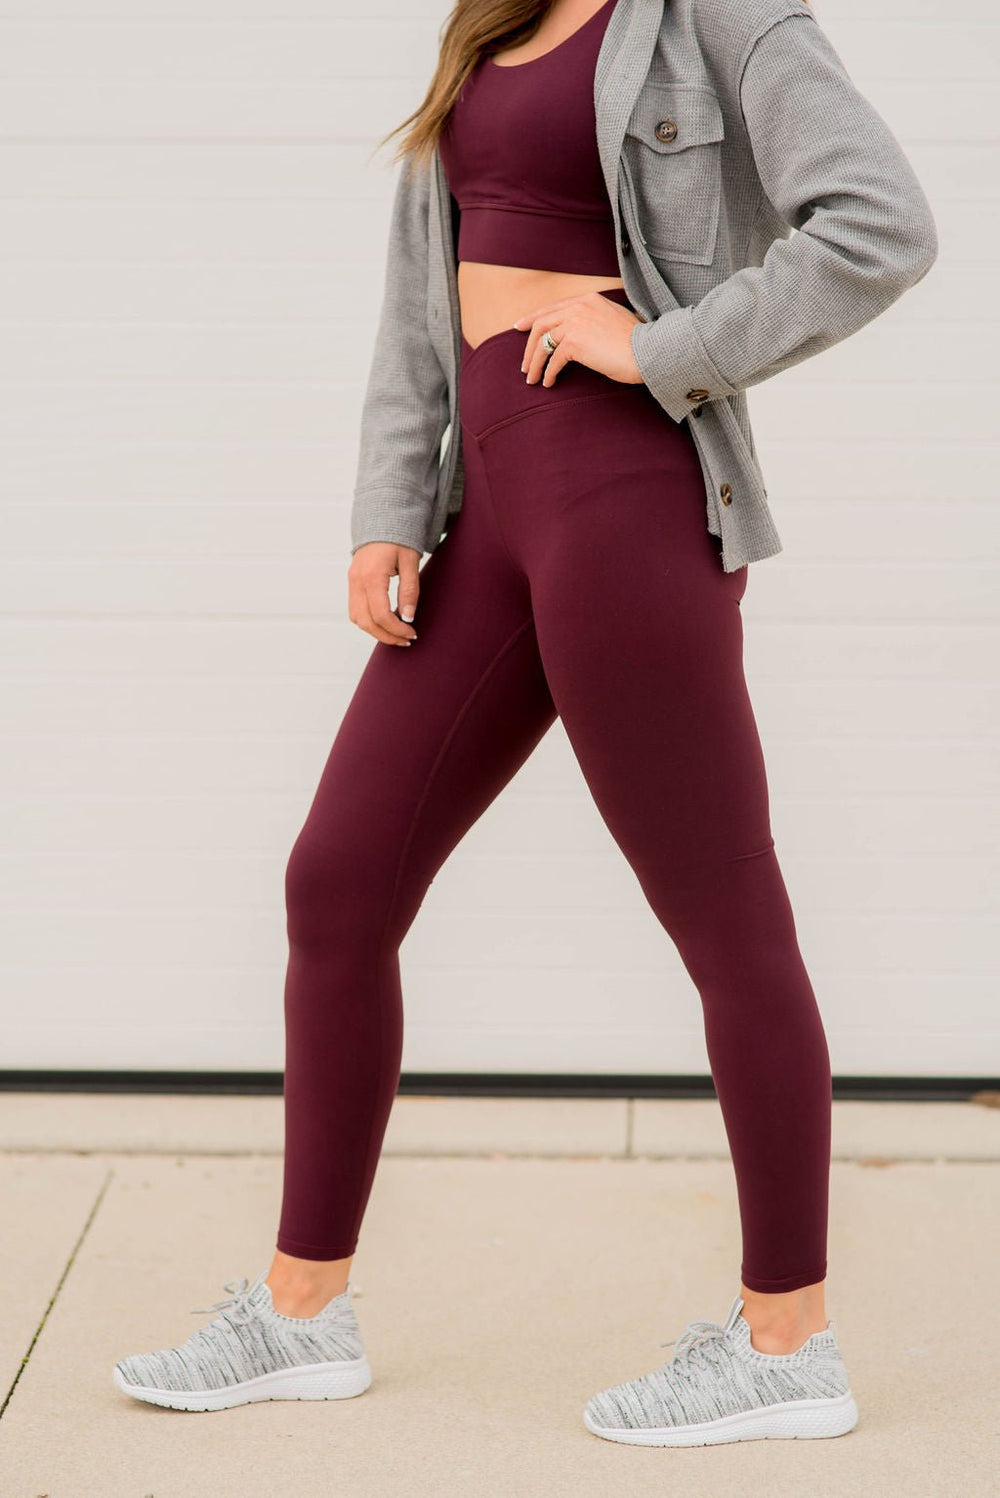 cute leggings outfits - Google Search | Cute outfits with jeans, Outfits  with leggings, Burgundy leggings outfit